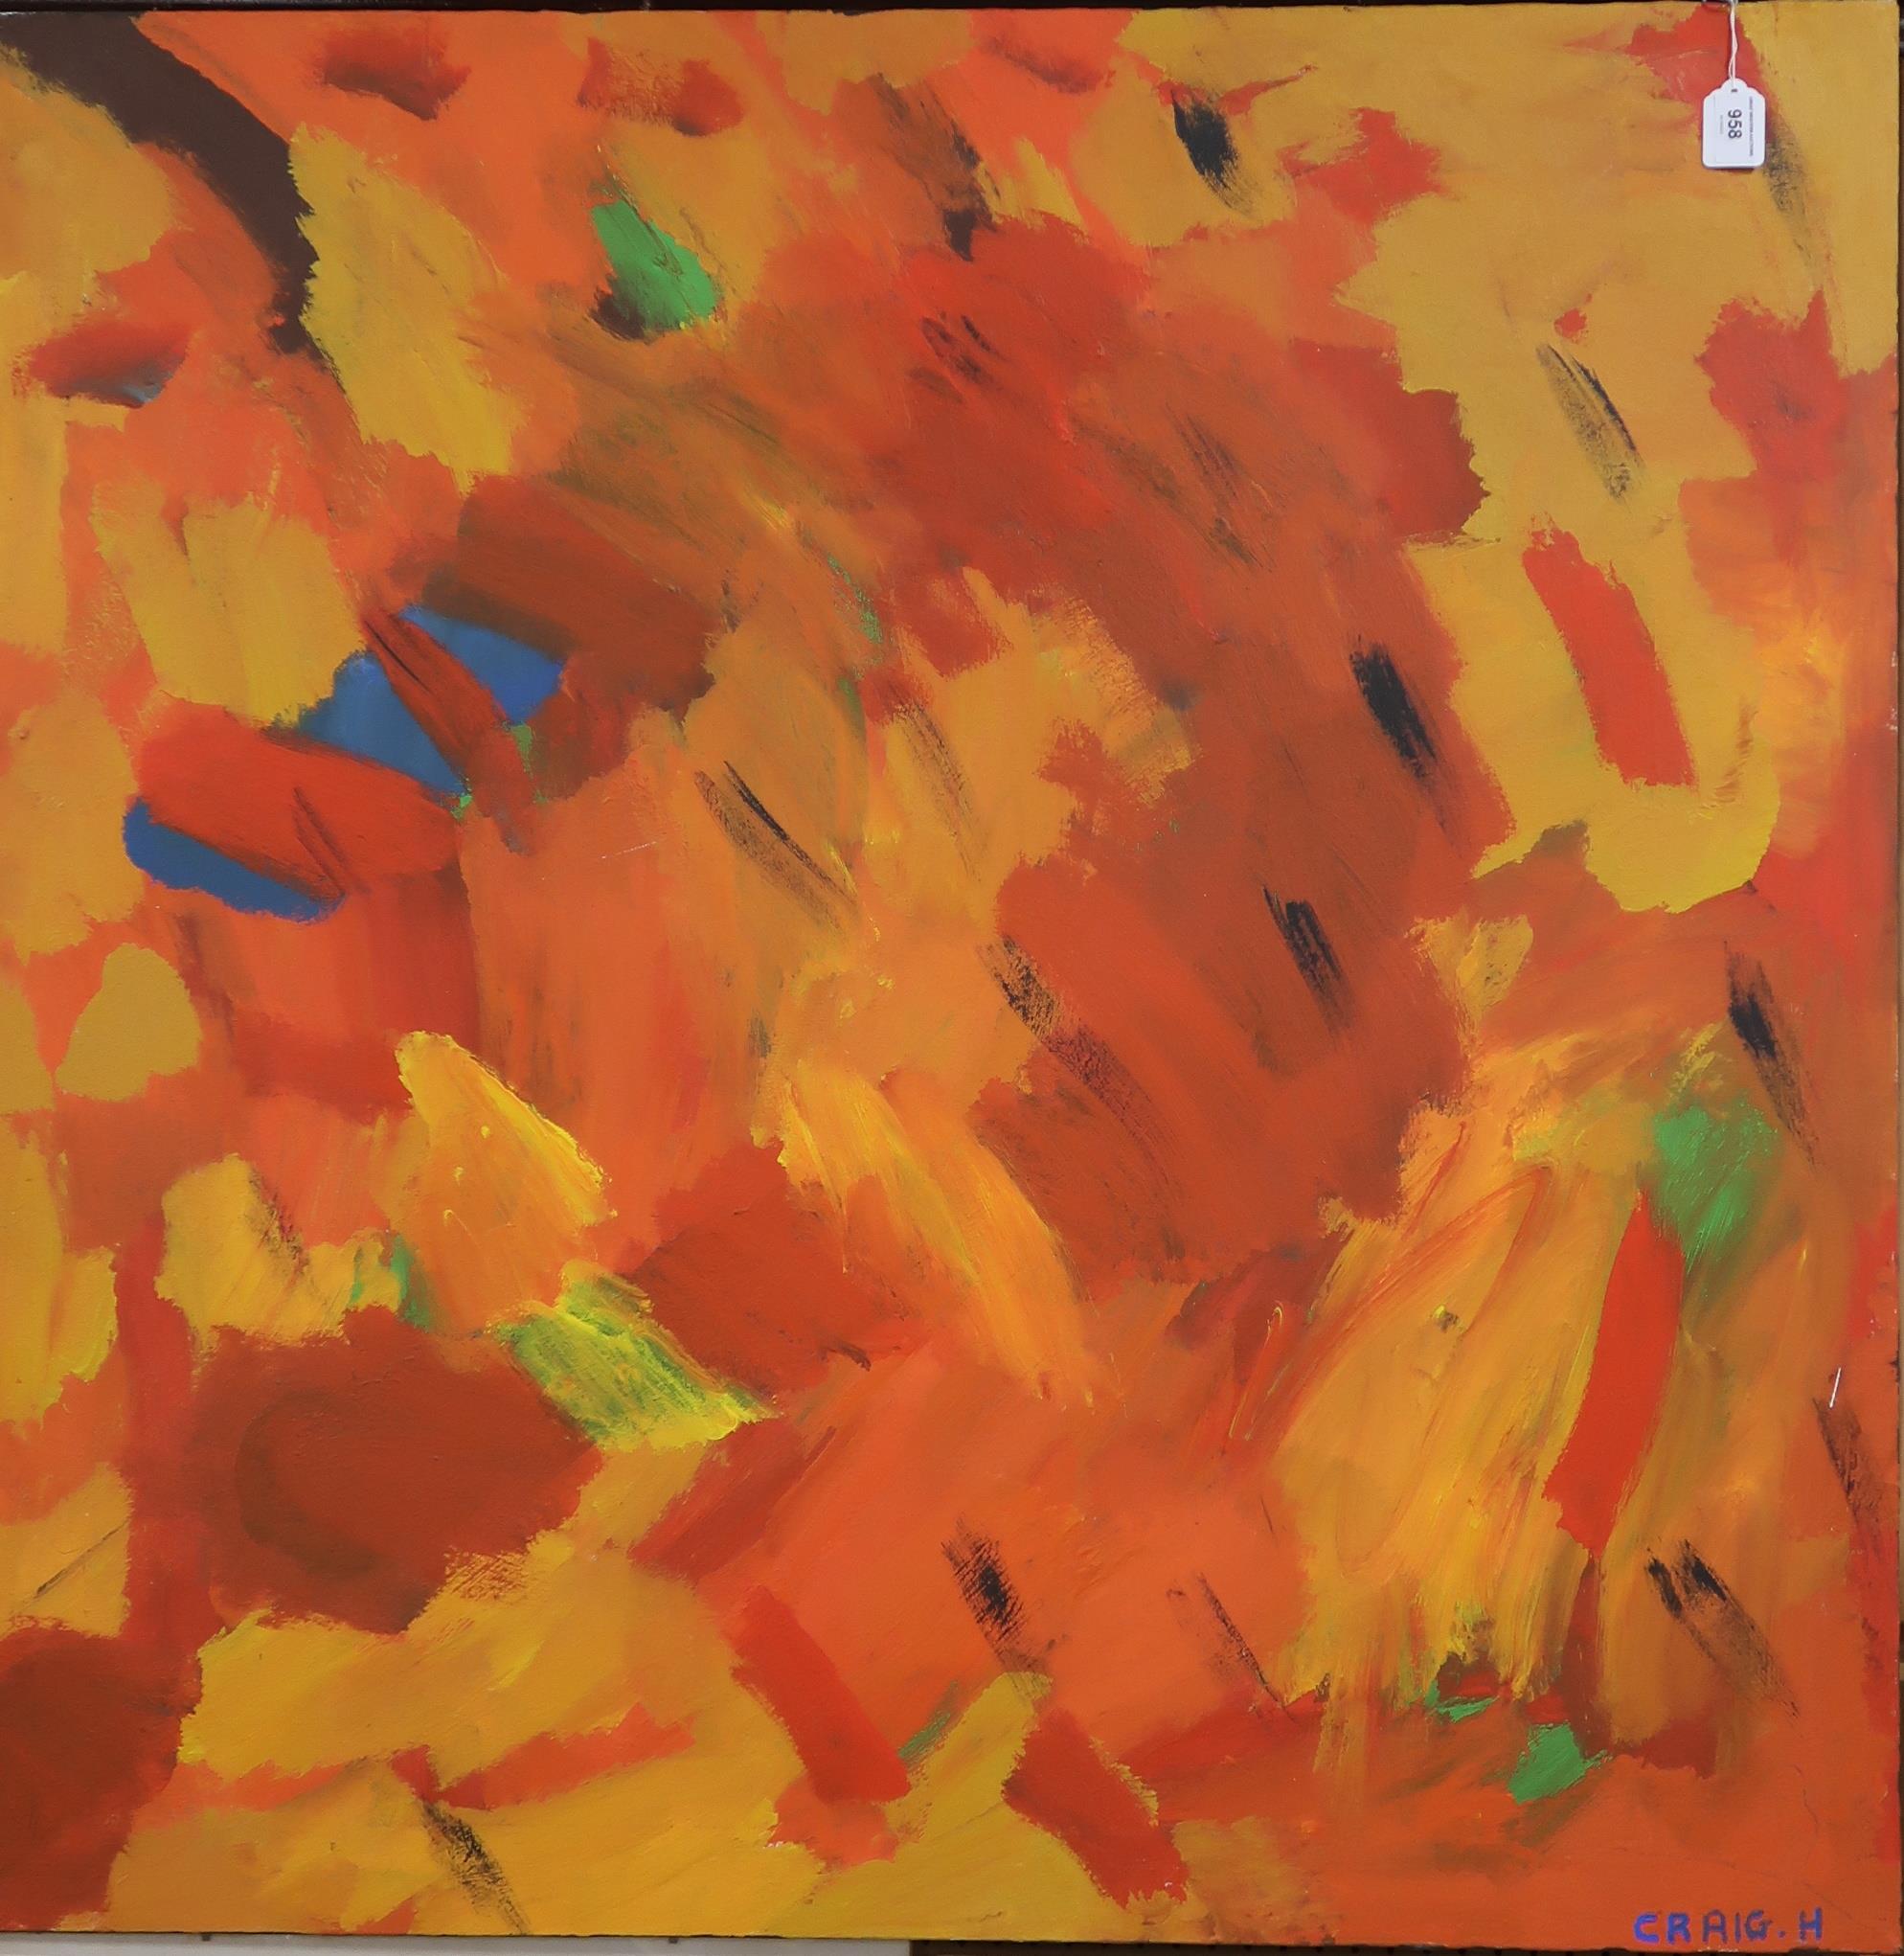 CRAIG H (CONTEMPORARY SCHOOL) ABSTRACT IN RED AND ORANGE  Oil on canvas, signed lower right, 102 x